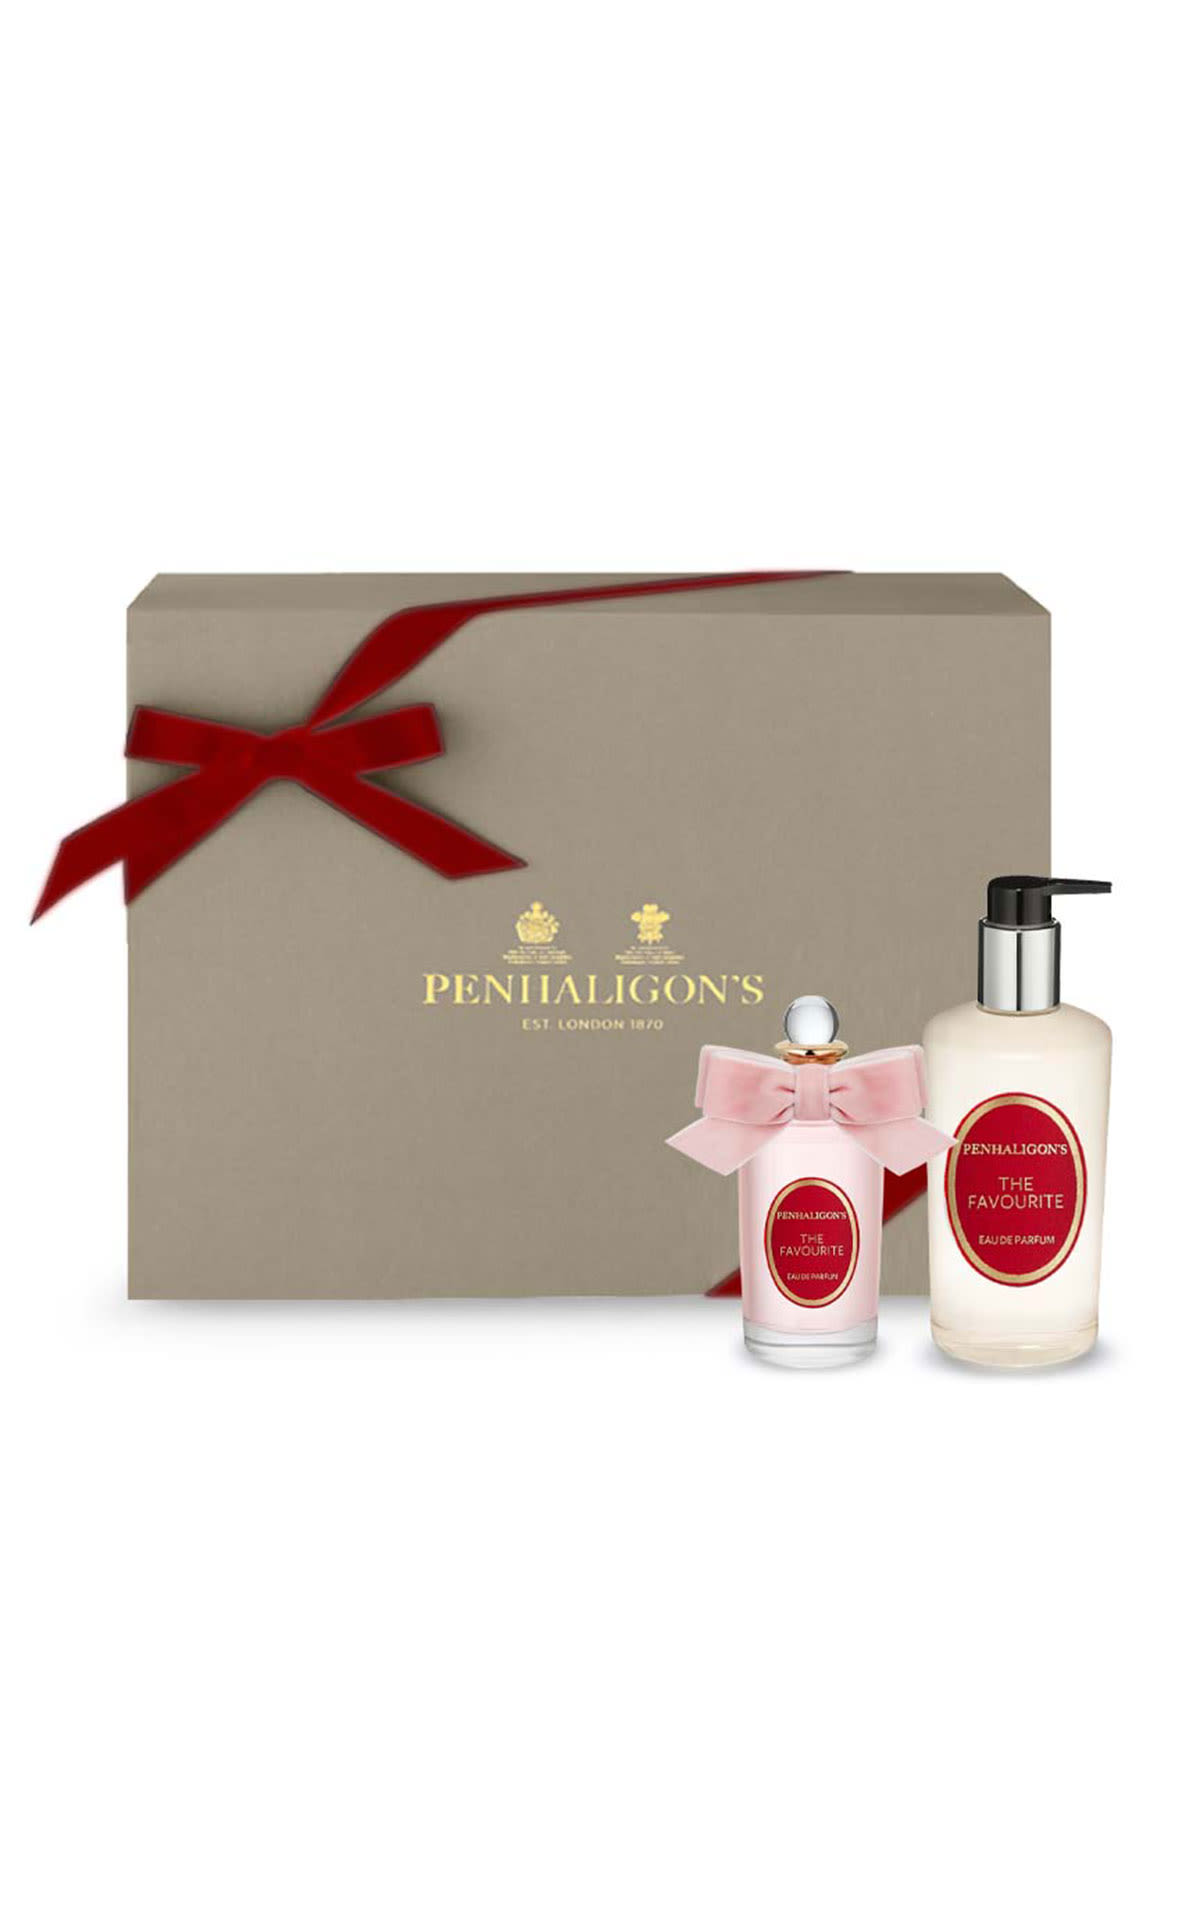 Penhaligons The favourite shower gel and perfume set from Bicester Village